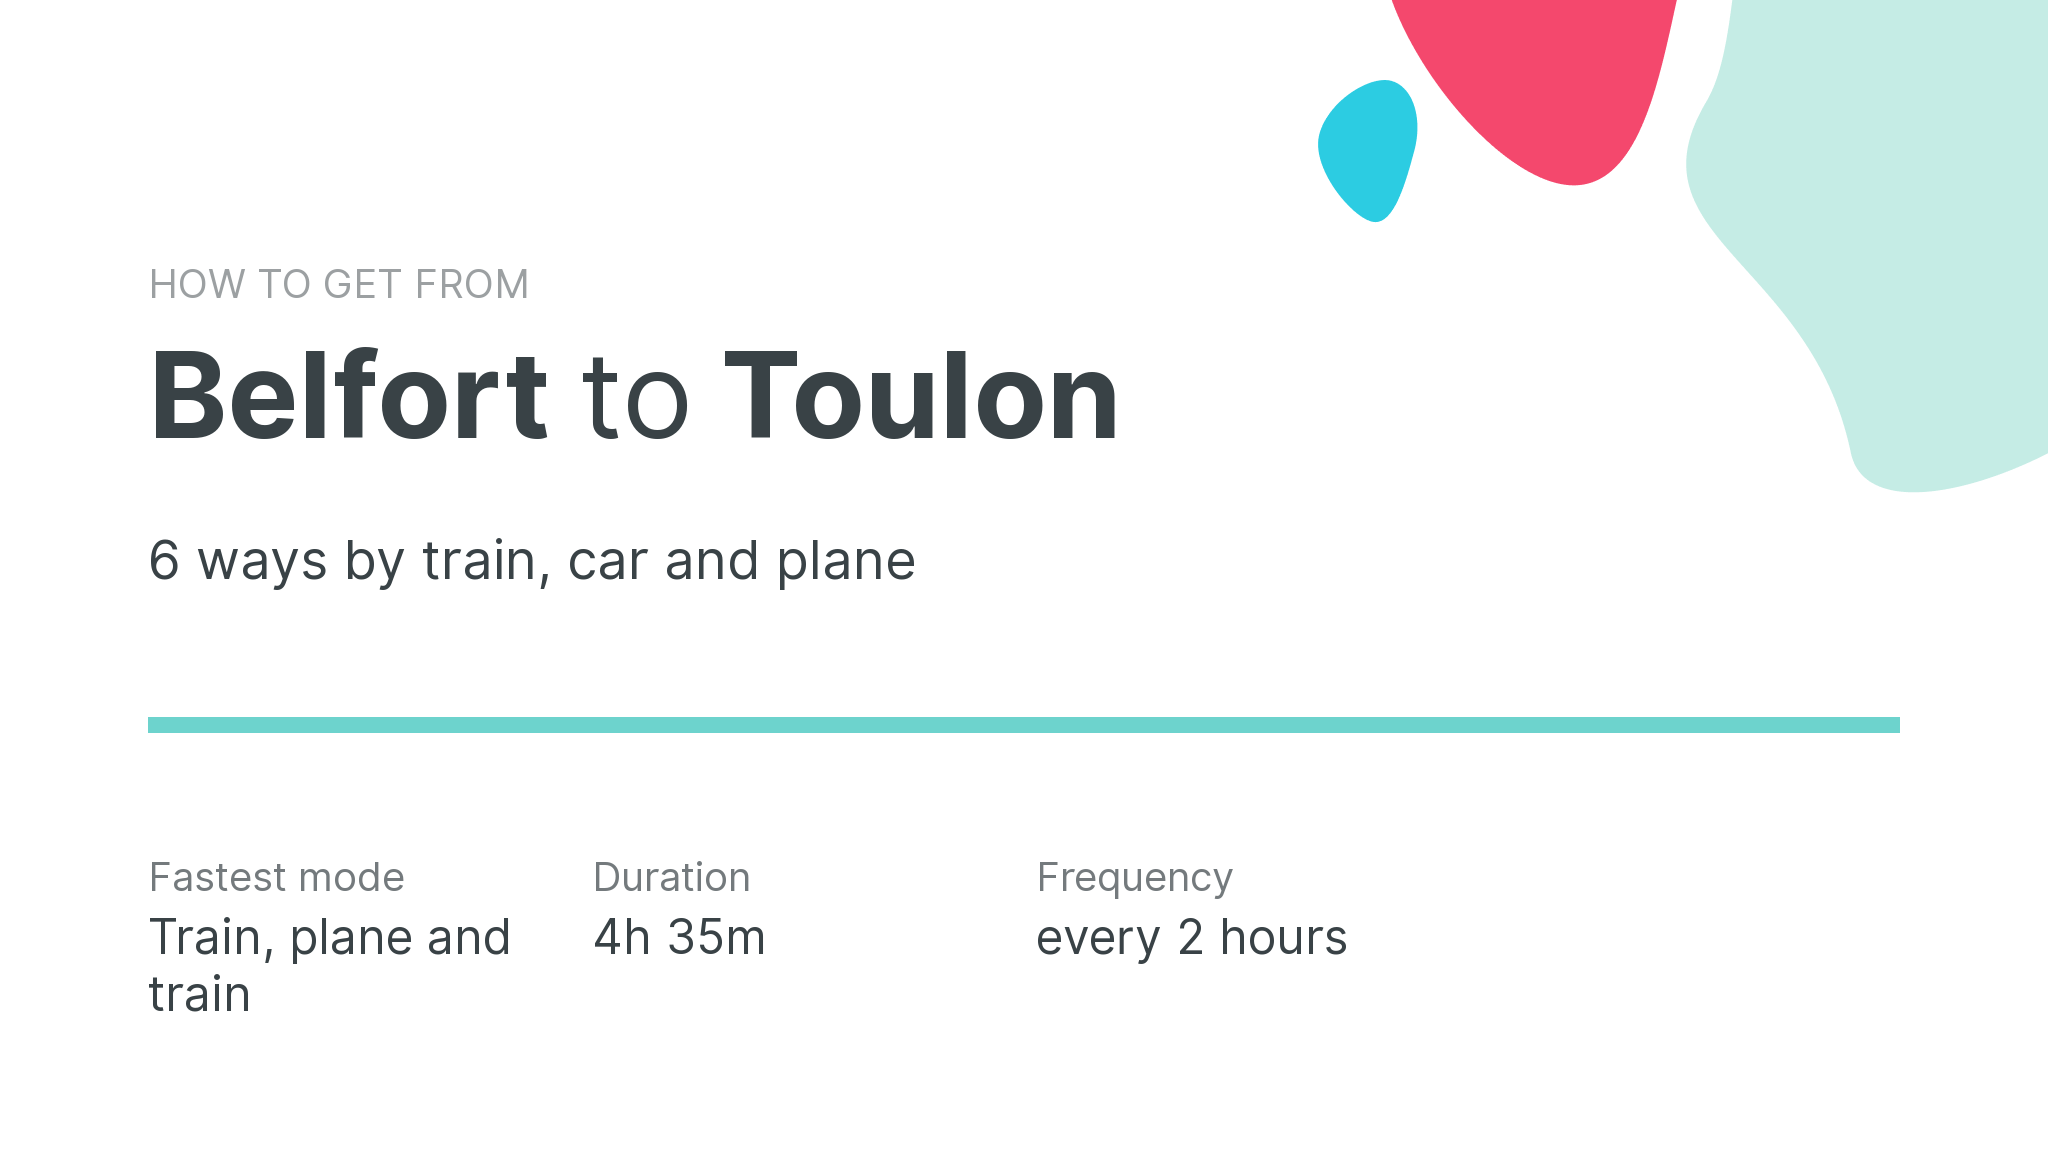 How do I get from Belfort to Toulon